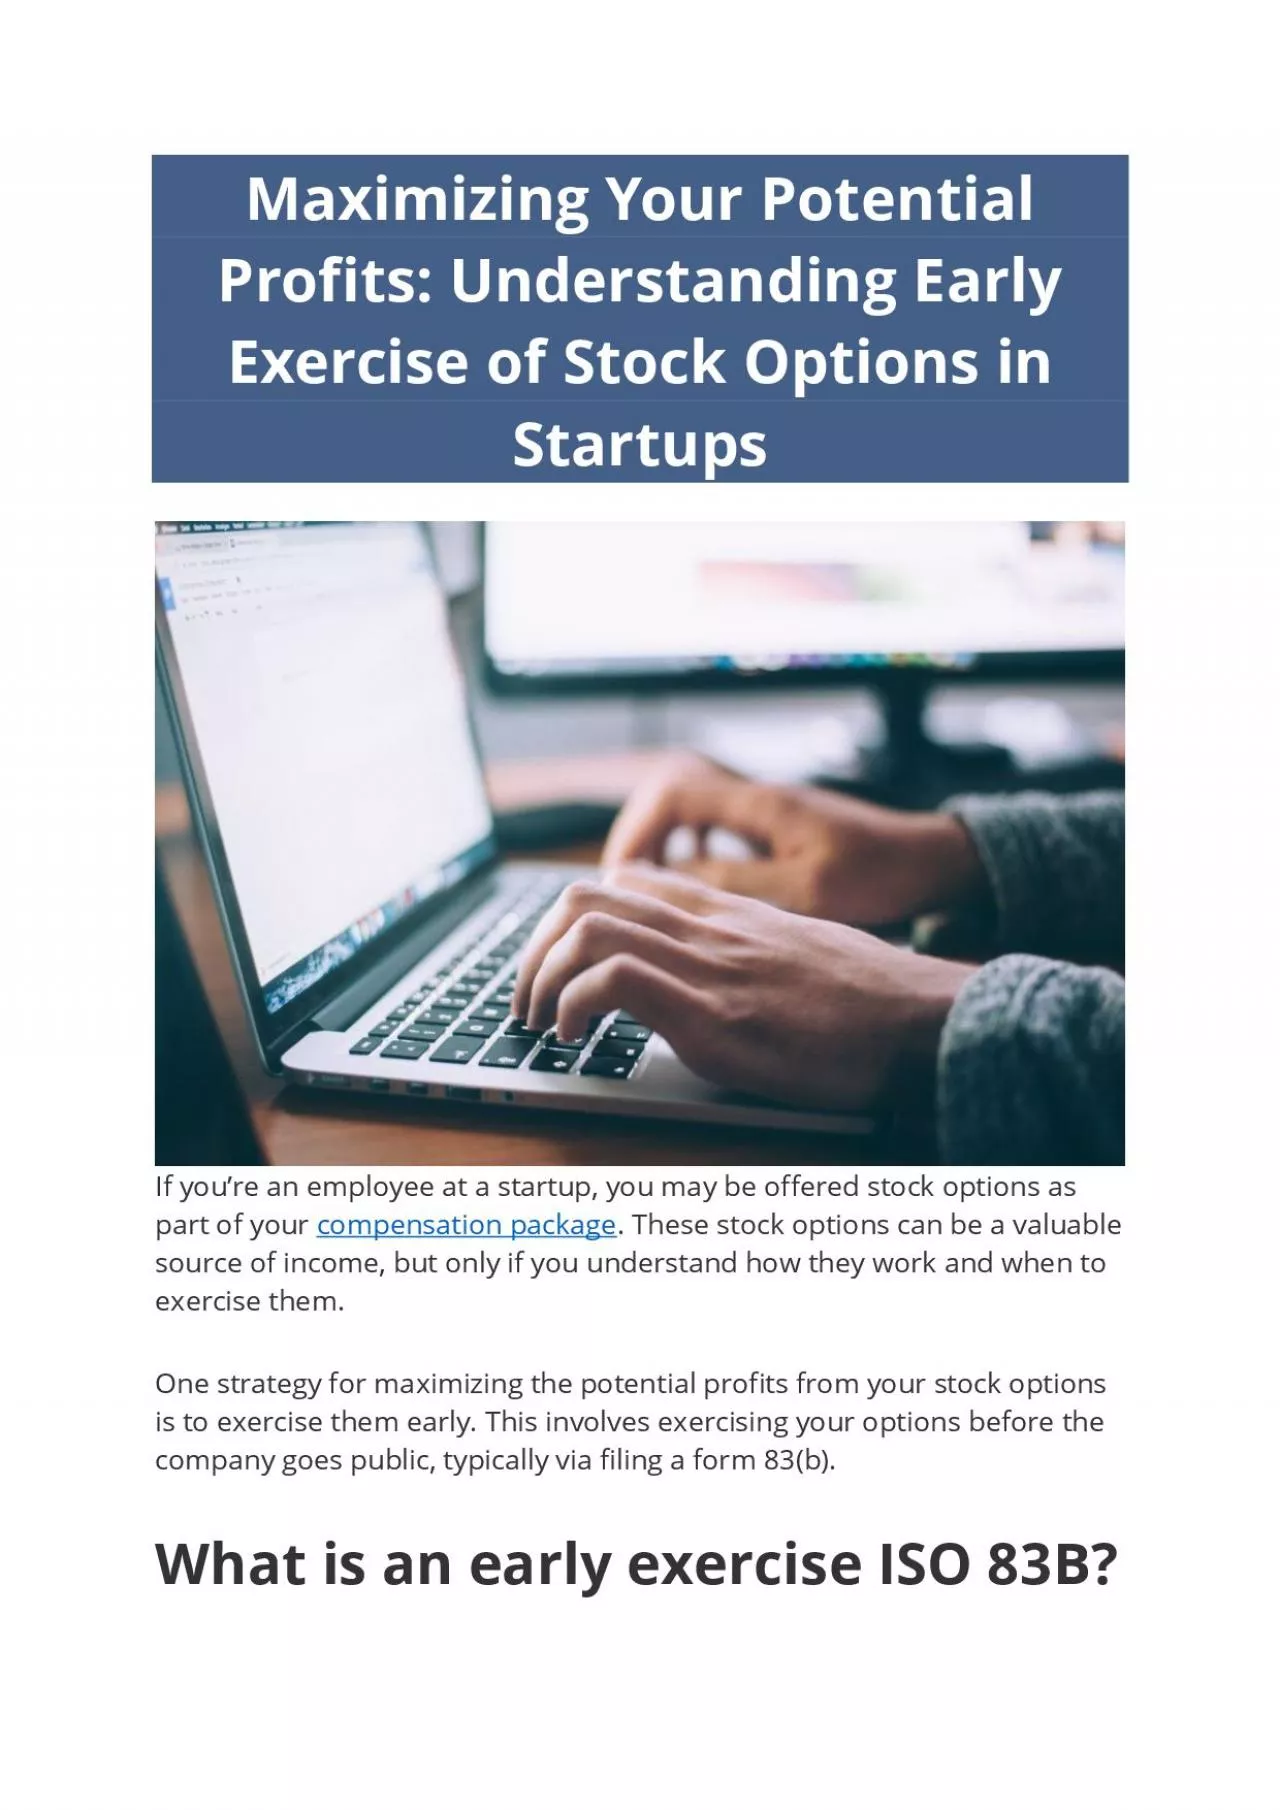 Maximizing Your Potential Profits Understanding Early Exercise of Stock Options in Startups